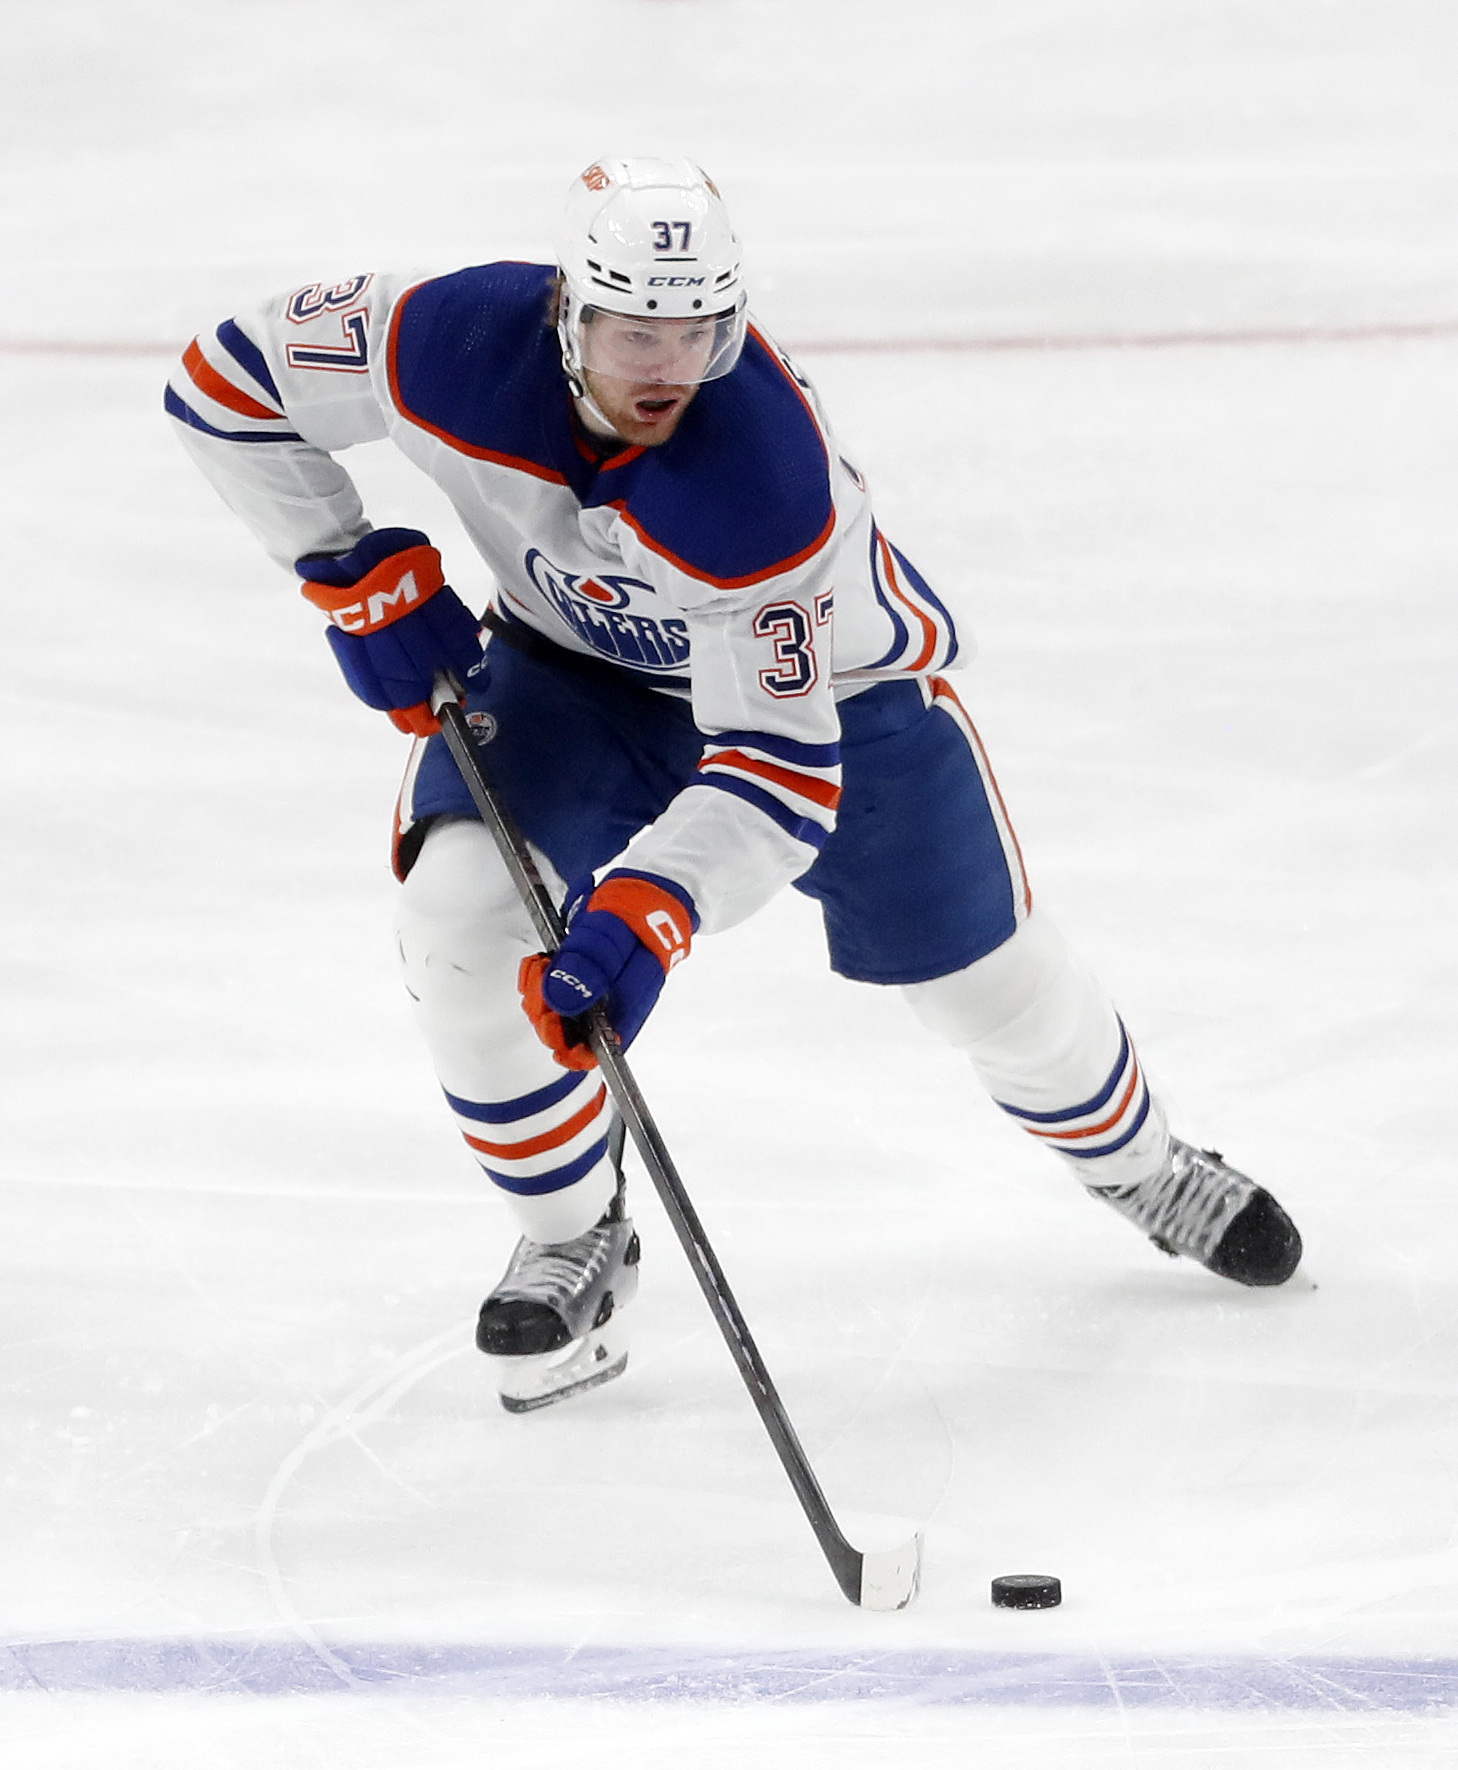 Connor McDavid, Oilers blank Penguins in physical game